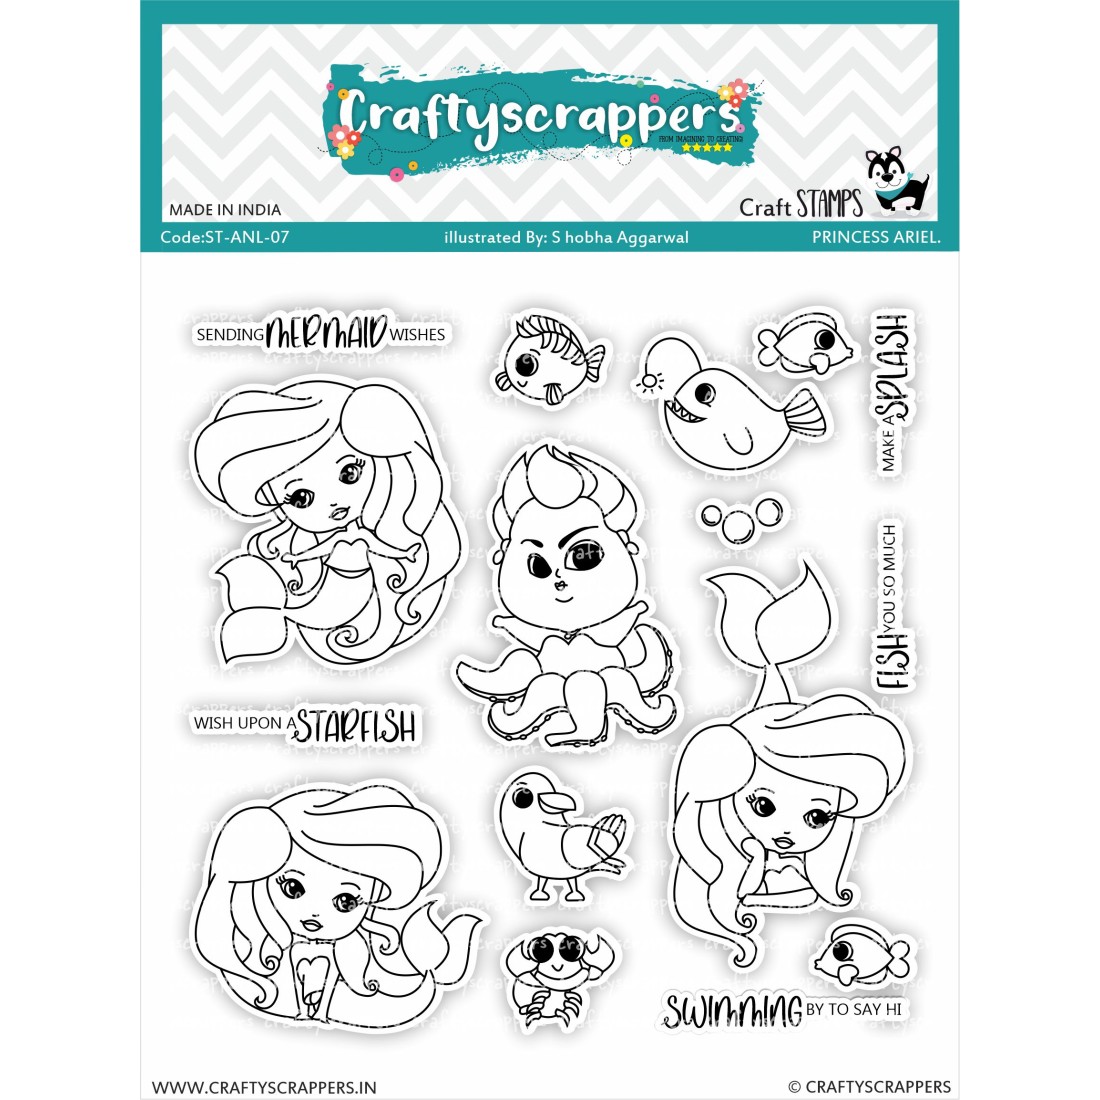 Craftyscrappers Stamps- PRINCESS ARIEL